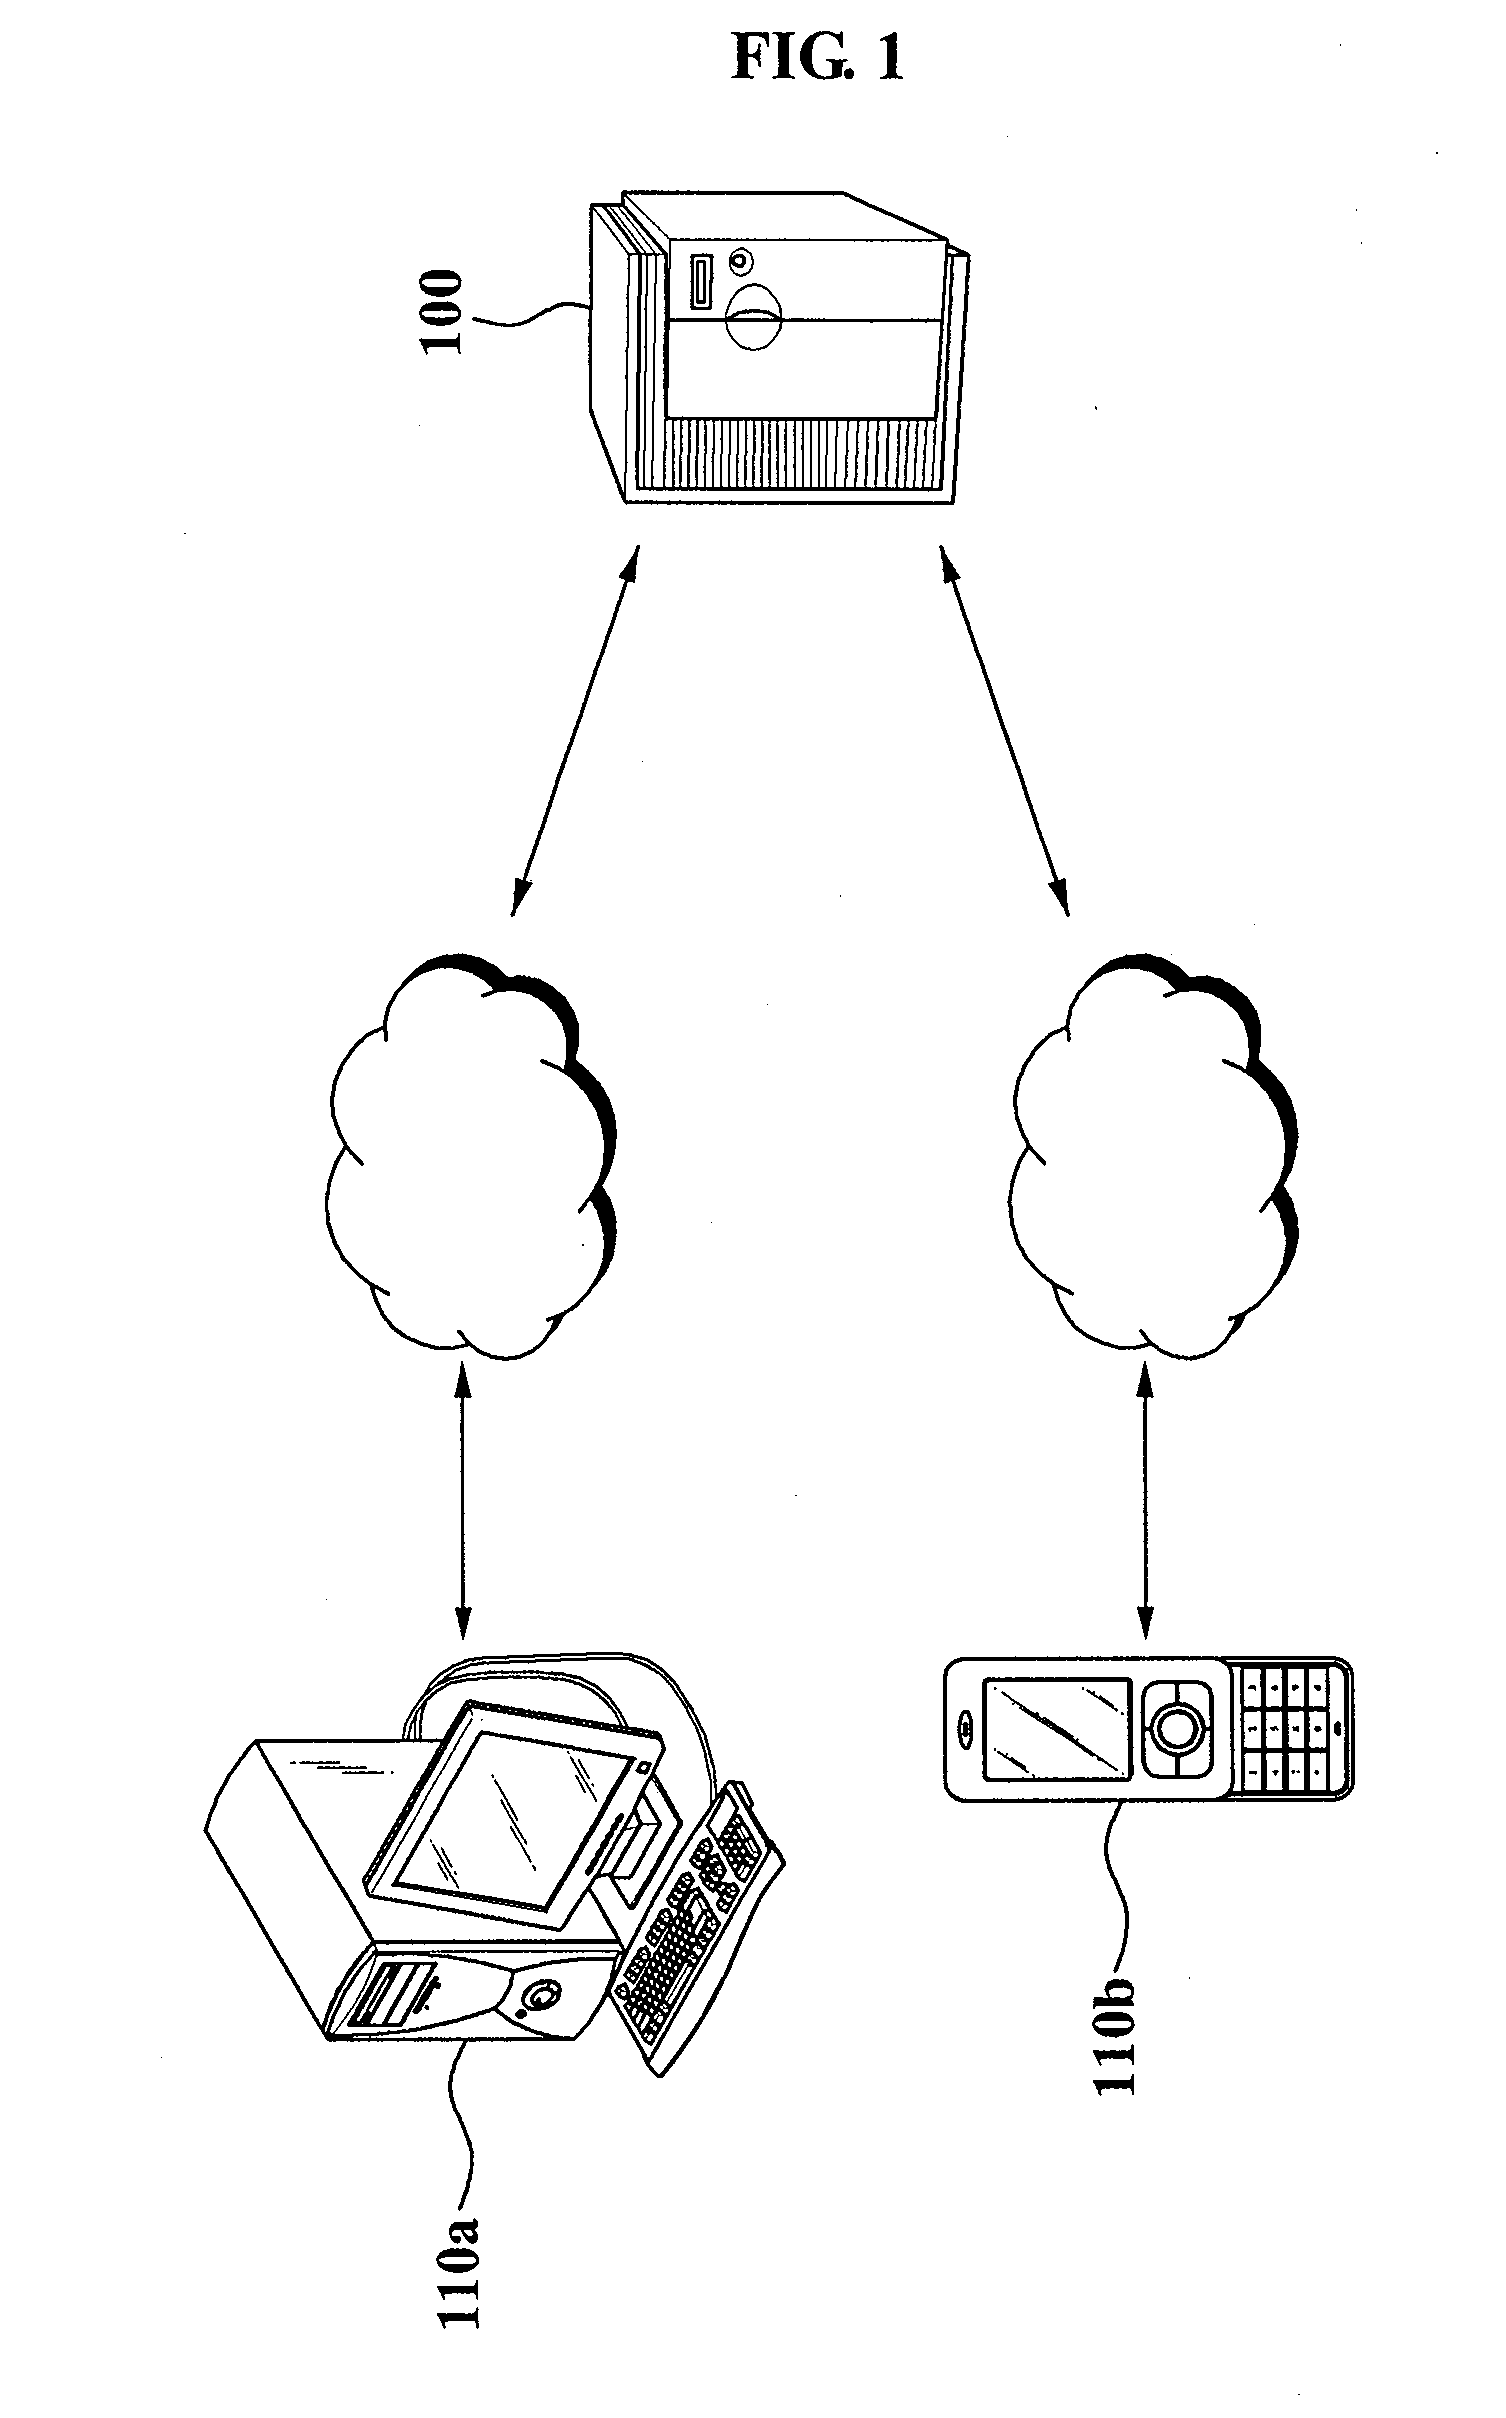 Method and System for Determining Relation Between Search Terms in the Internet Search System